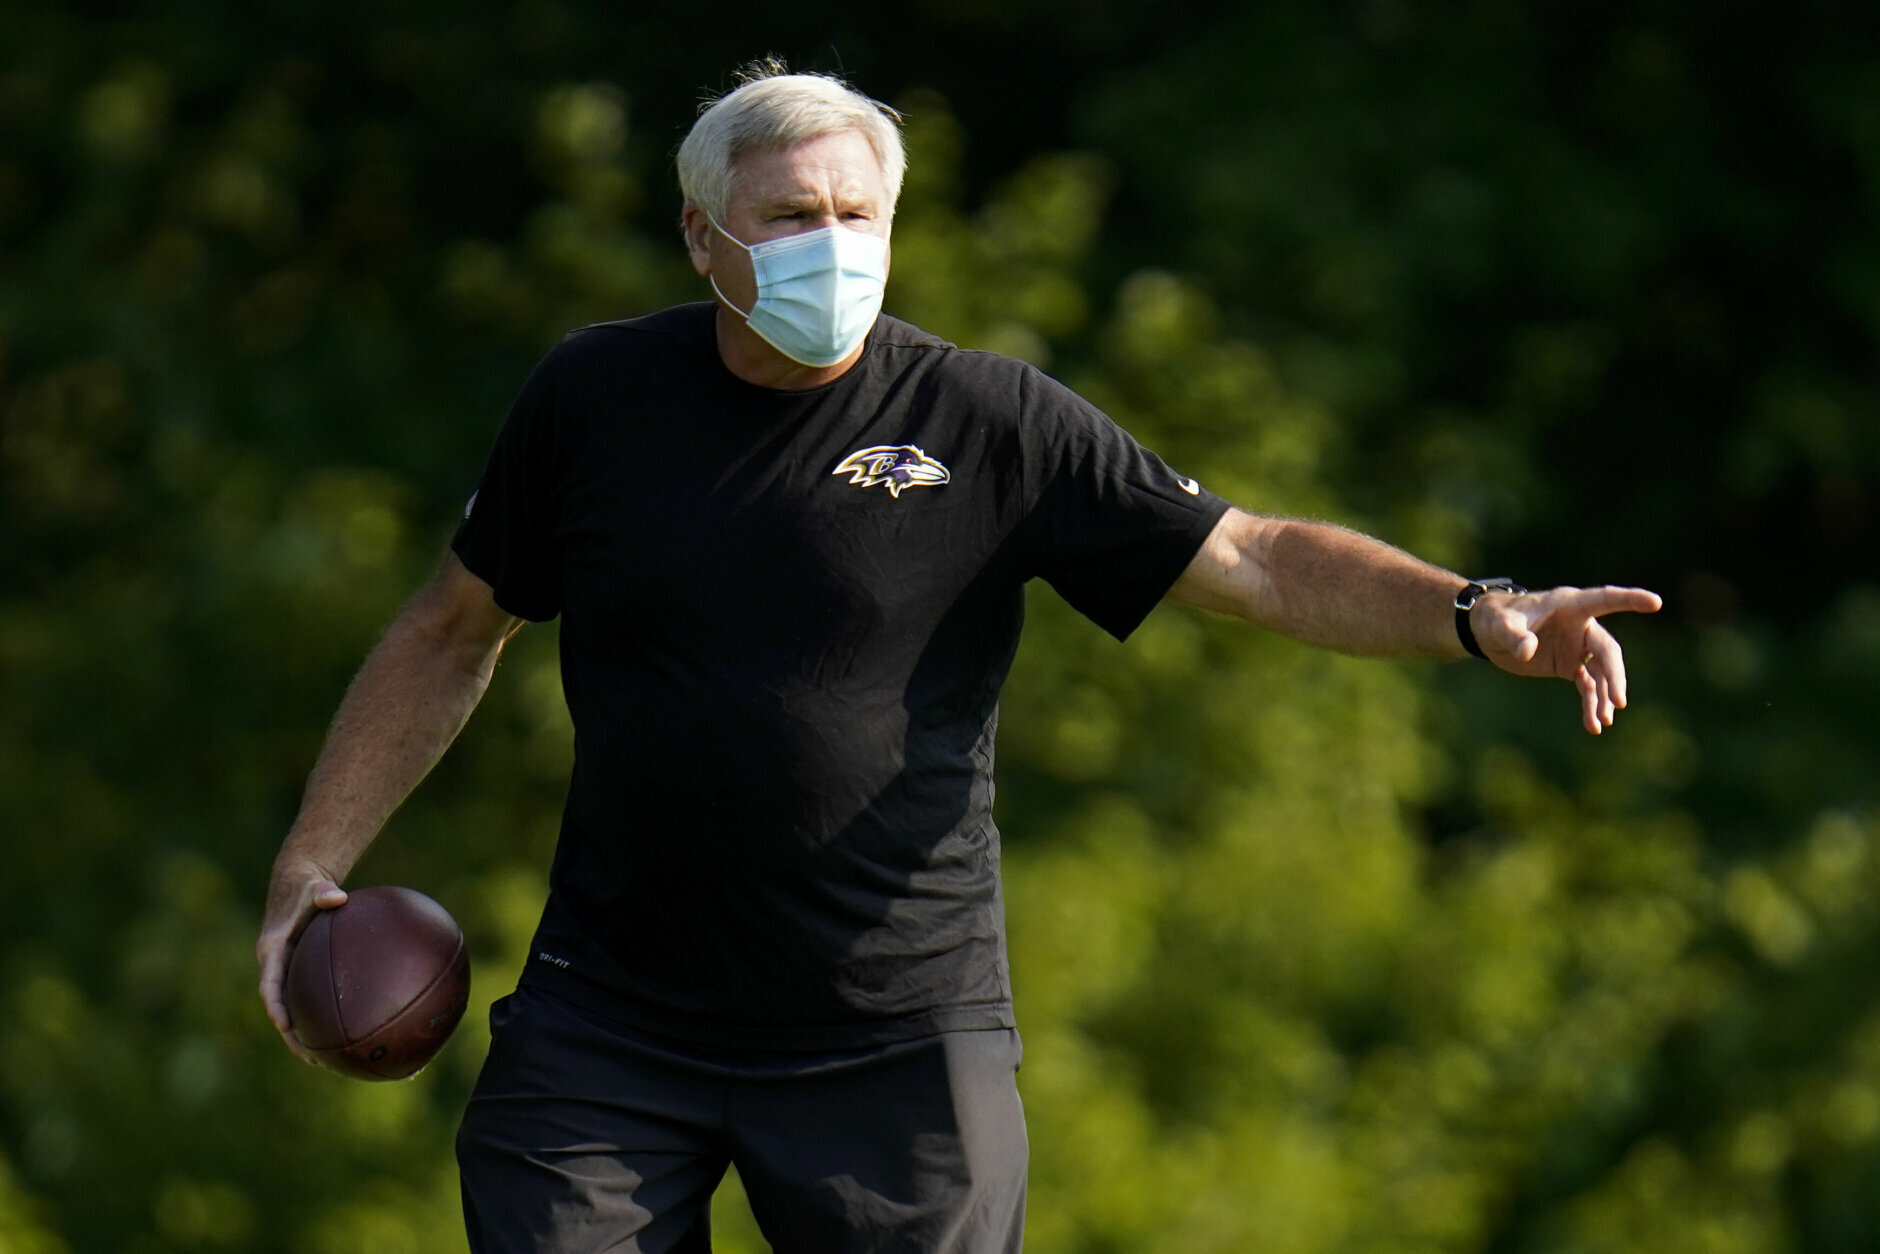 <p><b>How will coronavirus affect the 2020 NFL season? </b></p>
<p>By now, you&#8217;ve seen all the testing protocols and plans for empty stadiums across the league. But even <a href="https://profootballtalk.nbcsports.com/2020/05/14/matthew-stafford-plans-to-stop-licking-his-fingers/" target="_blank" rel="noopener" data-saferedirecturl="https://www.google.com/url?q=https://profootballtalk.nbcsports.com/2020/05/14/matthew-stafford-plans-to-stop-licking-his-fingers/&amp;source=gmail&amp;ust=1599580562312000&amp;usg=AFQjCNHE9EEduzfA00-rS2-FU4m9PT0fQg">the smallest quirks are being changed</a>, and there&#8217;s the ever present question of how much of a competitive advantage/disadvantage this will create for the 32 teams.</p>
<p>The league got through training camp with few problems, generating <a href="https://profootballtalk.nbcsports.com/2020/09/01/nfl-nflpa-announce-10-positive-covid-19-tests-between-august-21-29/">only 10 positive tests out of over 58,000</a> at the end of last month. But if COVID has taught us anything, it&#8217;s that a spike in cases is always just around the corner if we don&#8217;t stay vigilant.</p>
<p>The closest comparison to this year&#8217;s challenges was in 2011, when there was no offseason program due to the lockout. That year, the lack of practice time led to injuries spiking by 25%. So in addition to the ever-present threat of the virus, run-of-the-mill injuries could derail a season for a number of teams, even with <a href="https://twitter.com/MarkMaske/status/1286733012563046402">the expanded practice squad</a>.</p>
